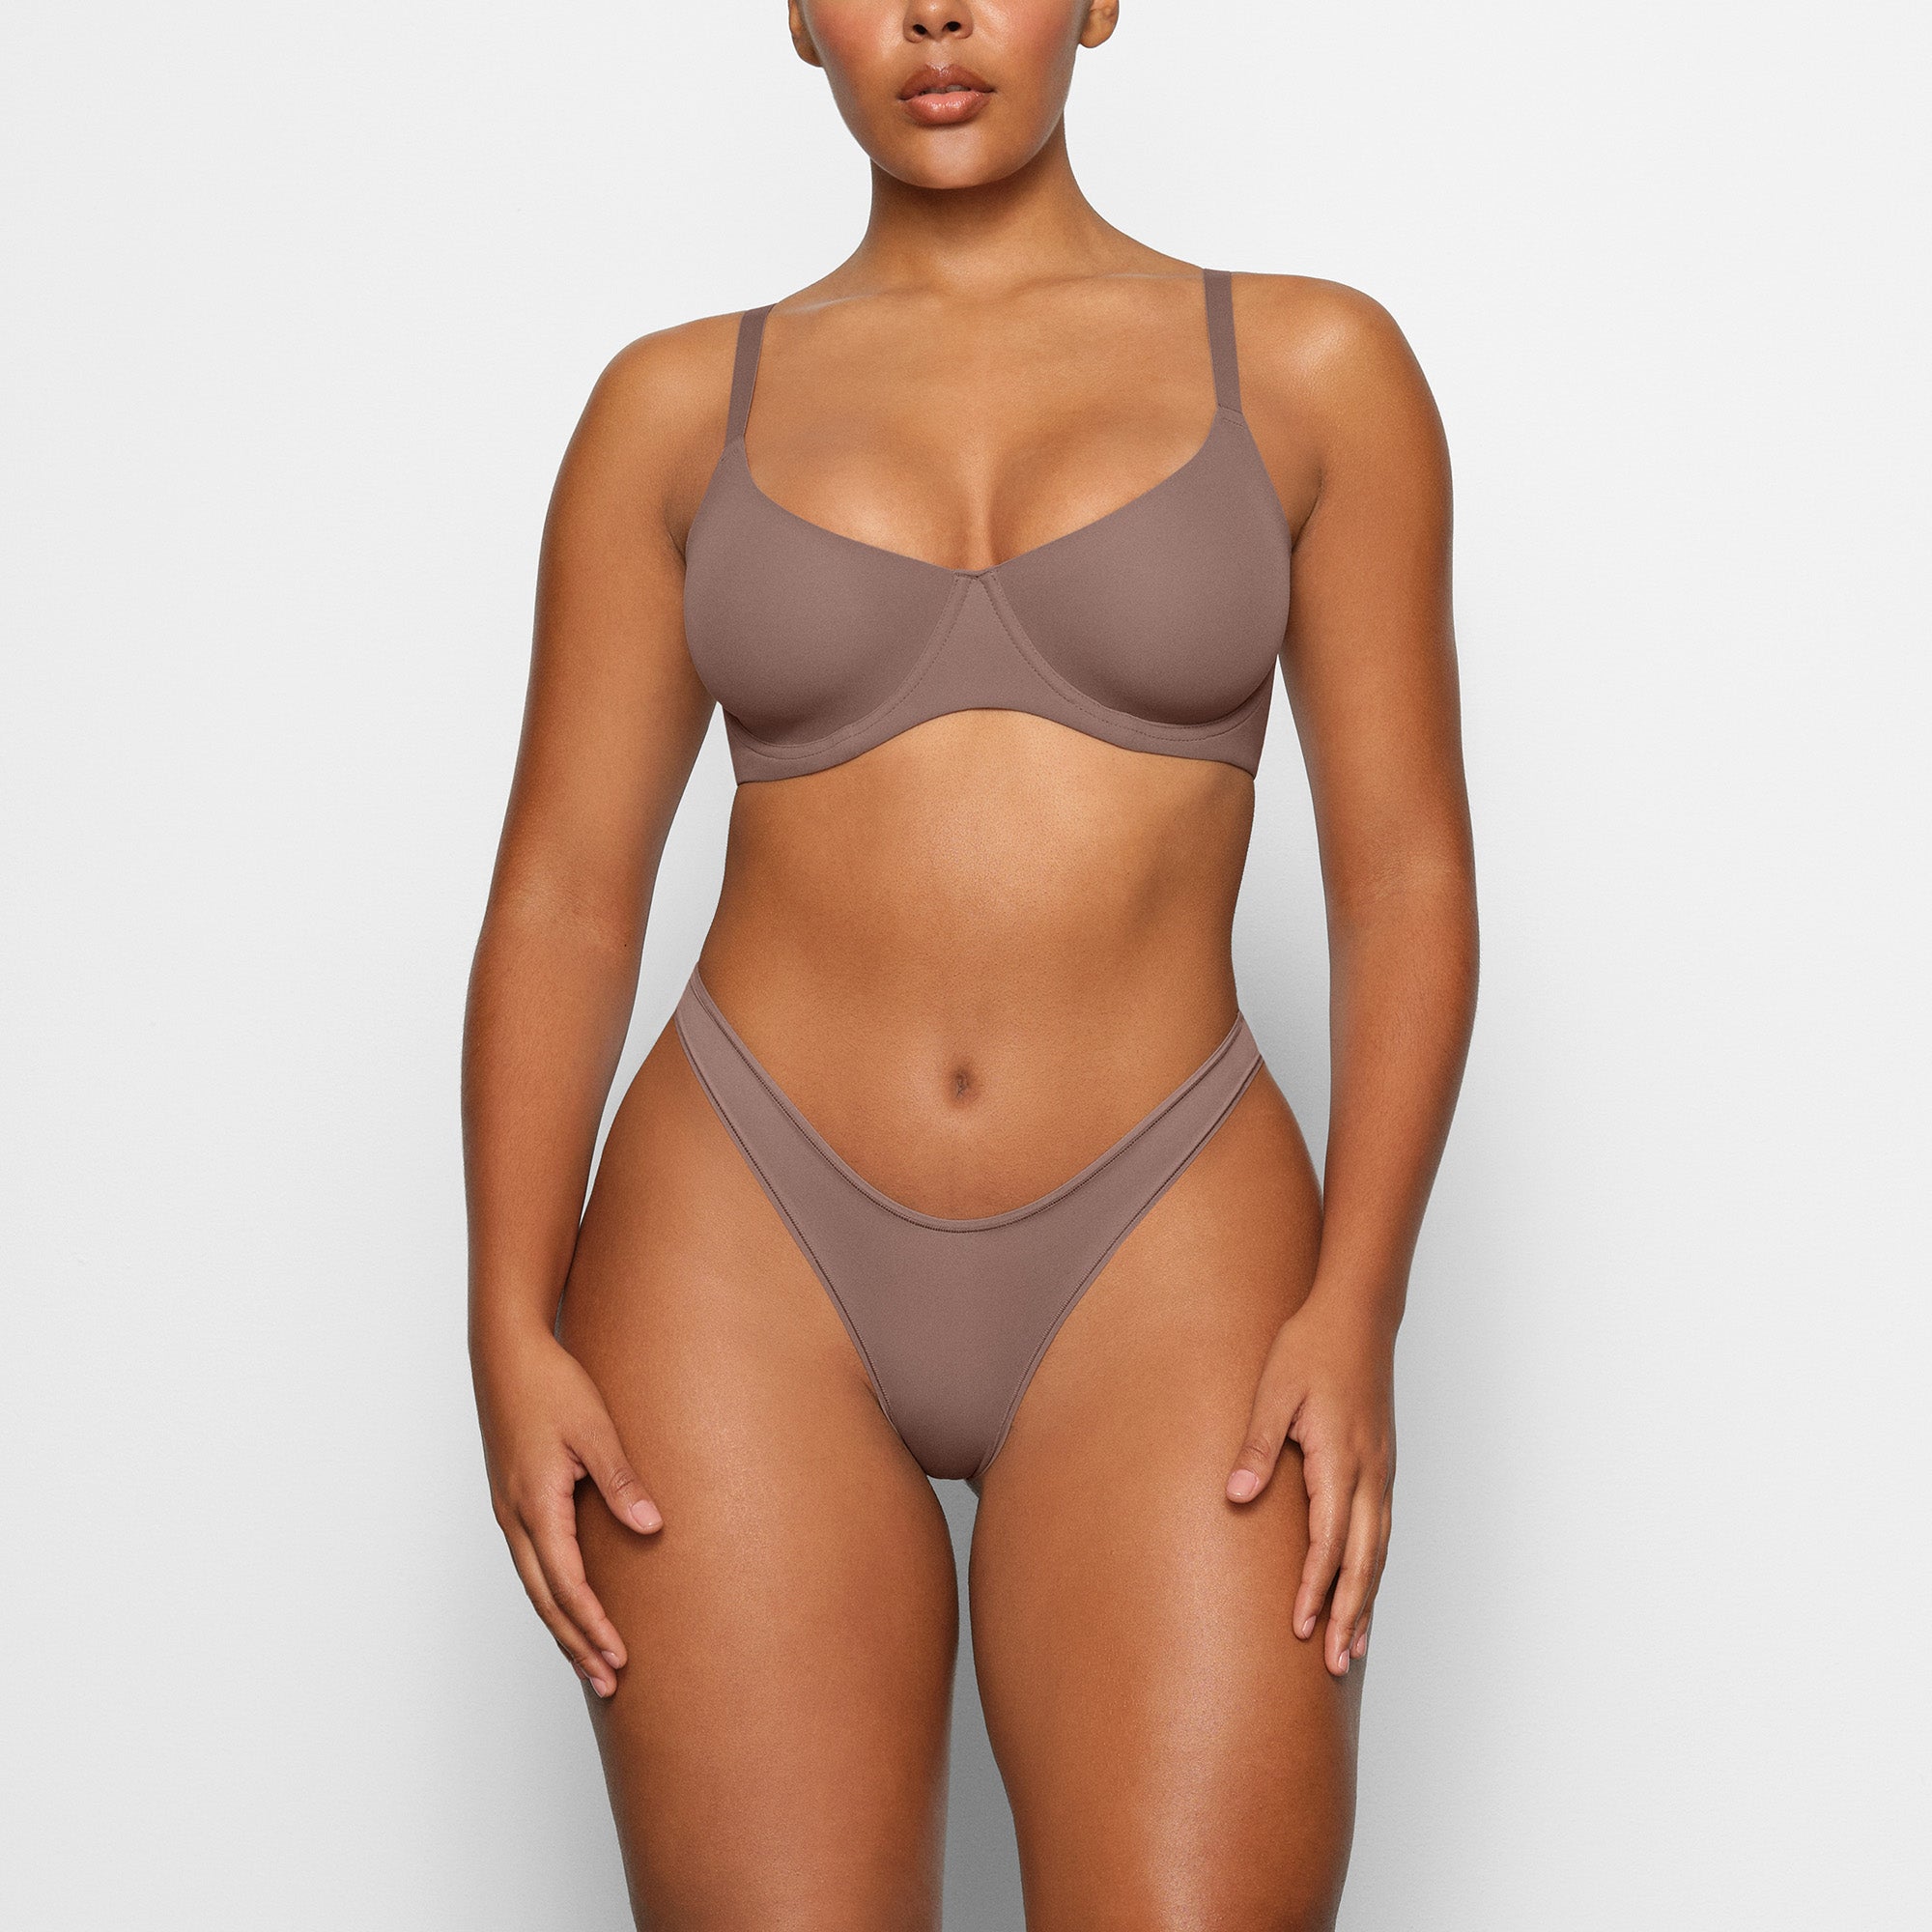 SKIMS Fits Everybody Unlined Underwire Bra in Onyx 36A Size 36 A - $60 New  With Tags - From Matilda